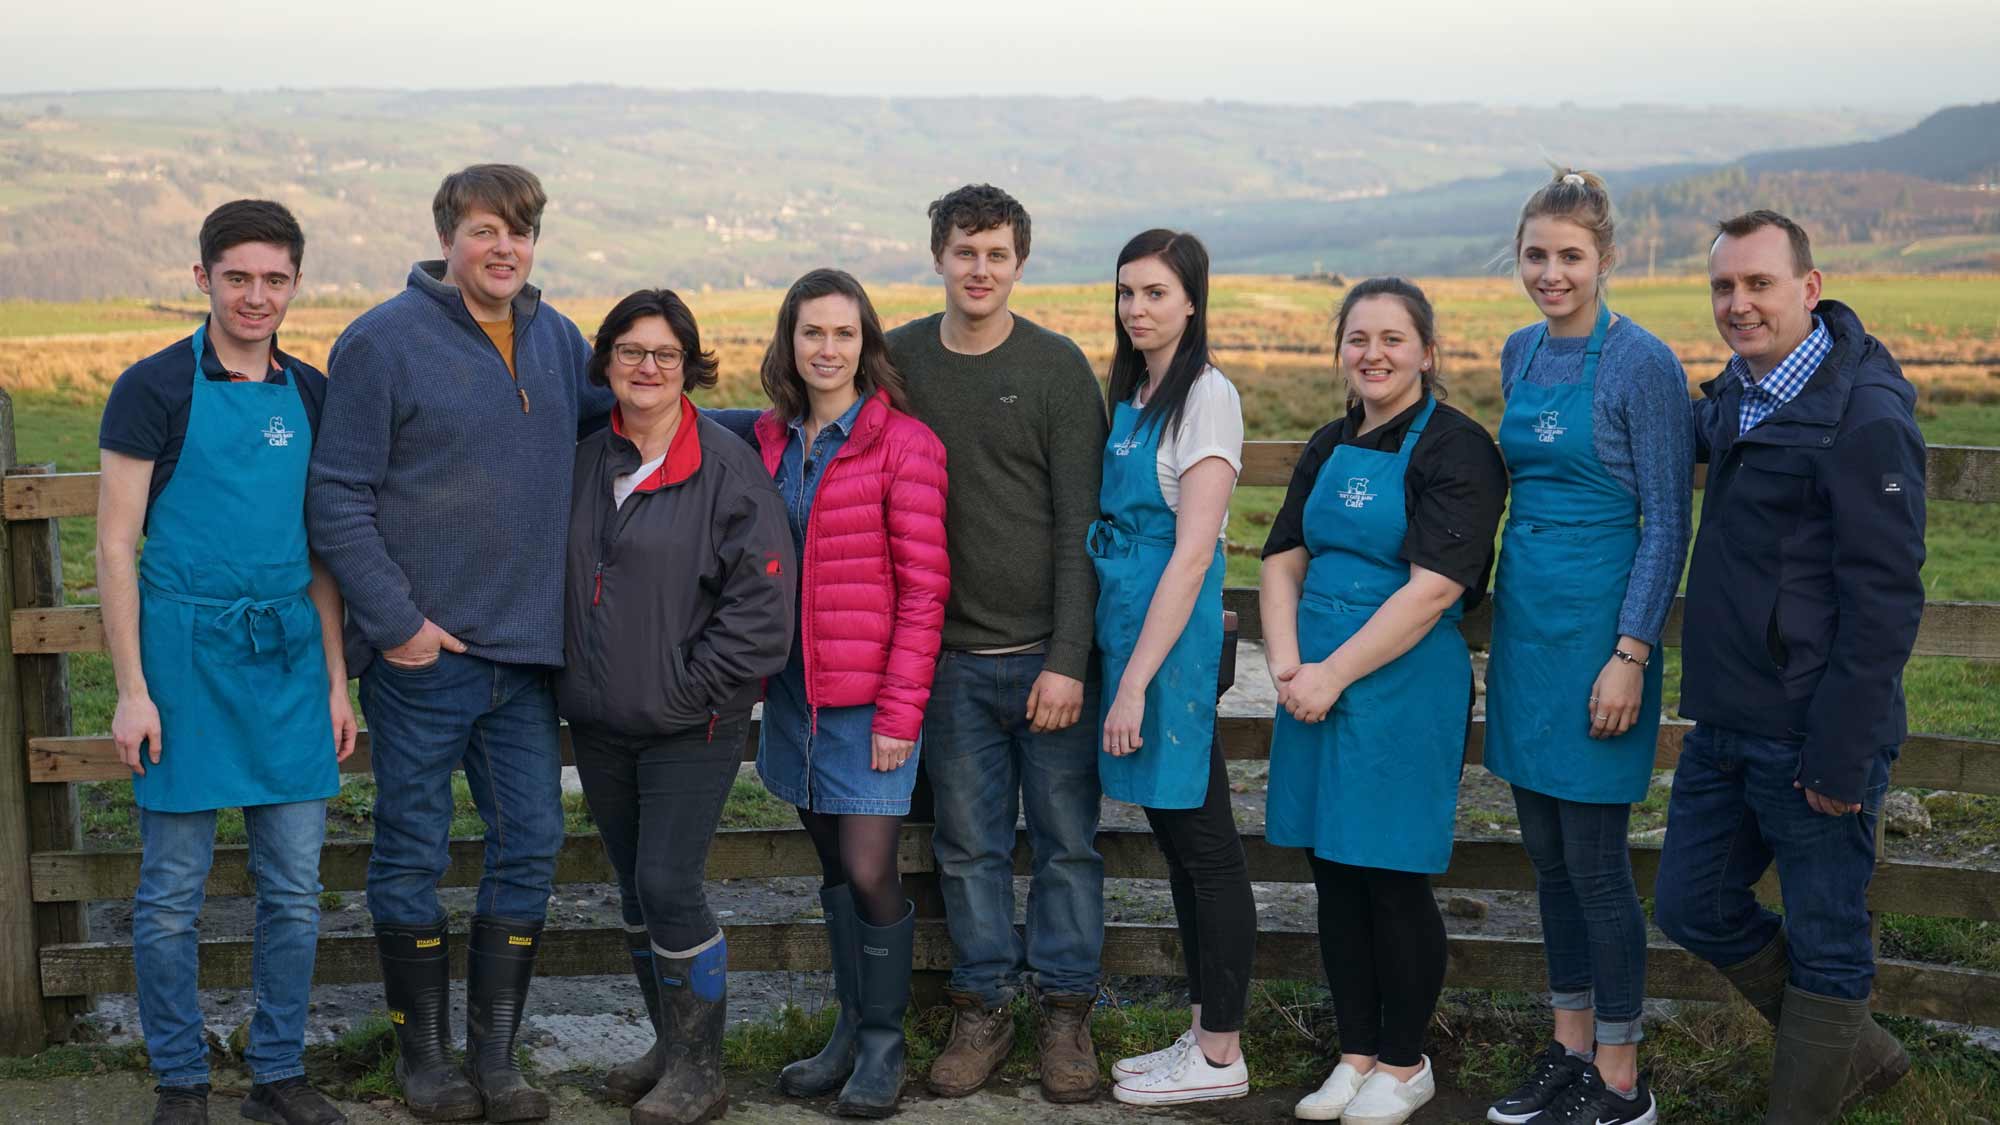 L-R) Steven McArdle, Chris Prince, Caroline Prince, Lindsay Chapman, Martin Prince, Ellie Cook, Anna Prince, Lucy Staveley, Robert Copley: Lindsay Chapman visits a family who are struggling to keep their farm afloat. Chris and Caroline Prince farm in Pately Bridge and have opened a café to diversify however it hasn’t all gone to plan. Farmer Robert Copley who was in a similar situation to the Prince's visits them to give them some advice in hope to save the farm and business. Toft Gate Farm, Pateley Bridge. Pic credit: Daisybeck Studios